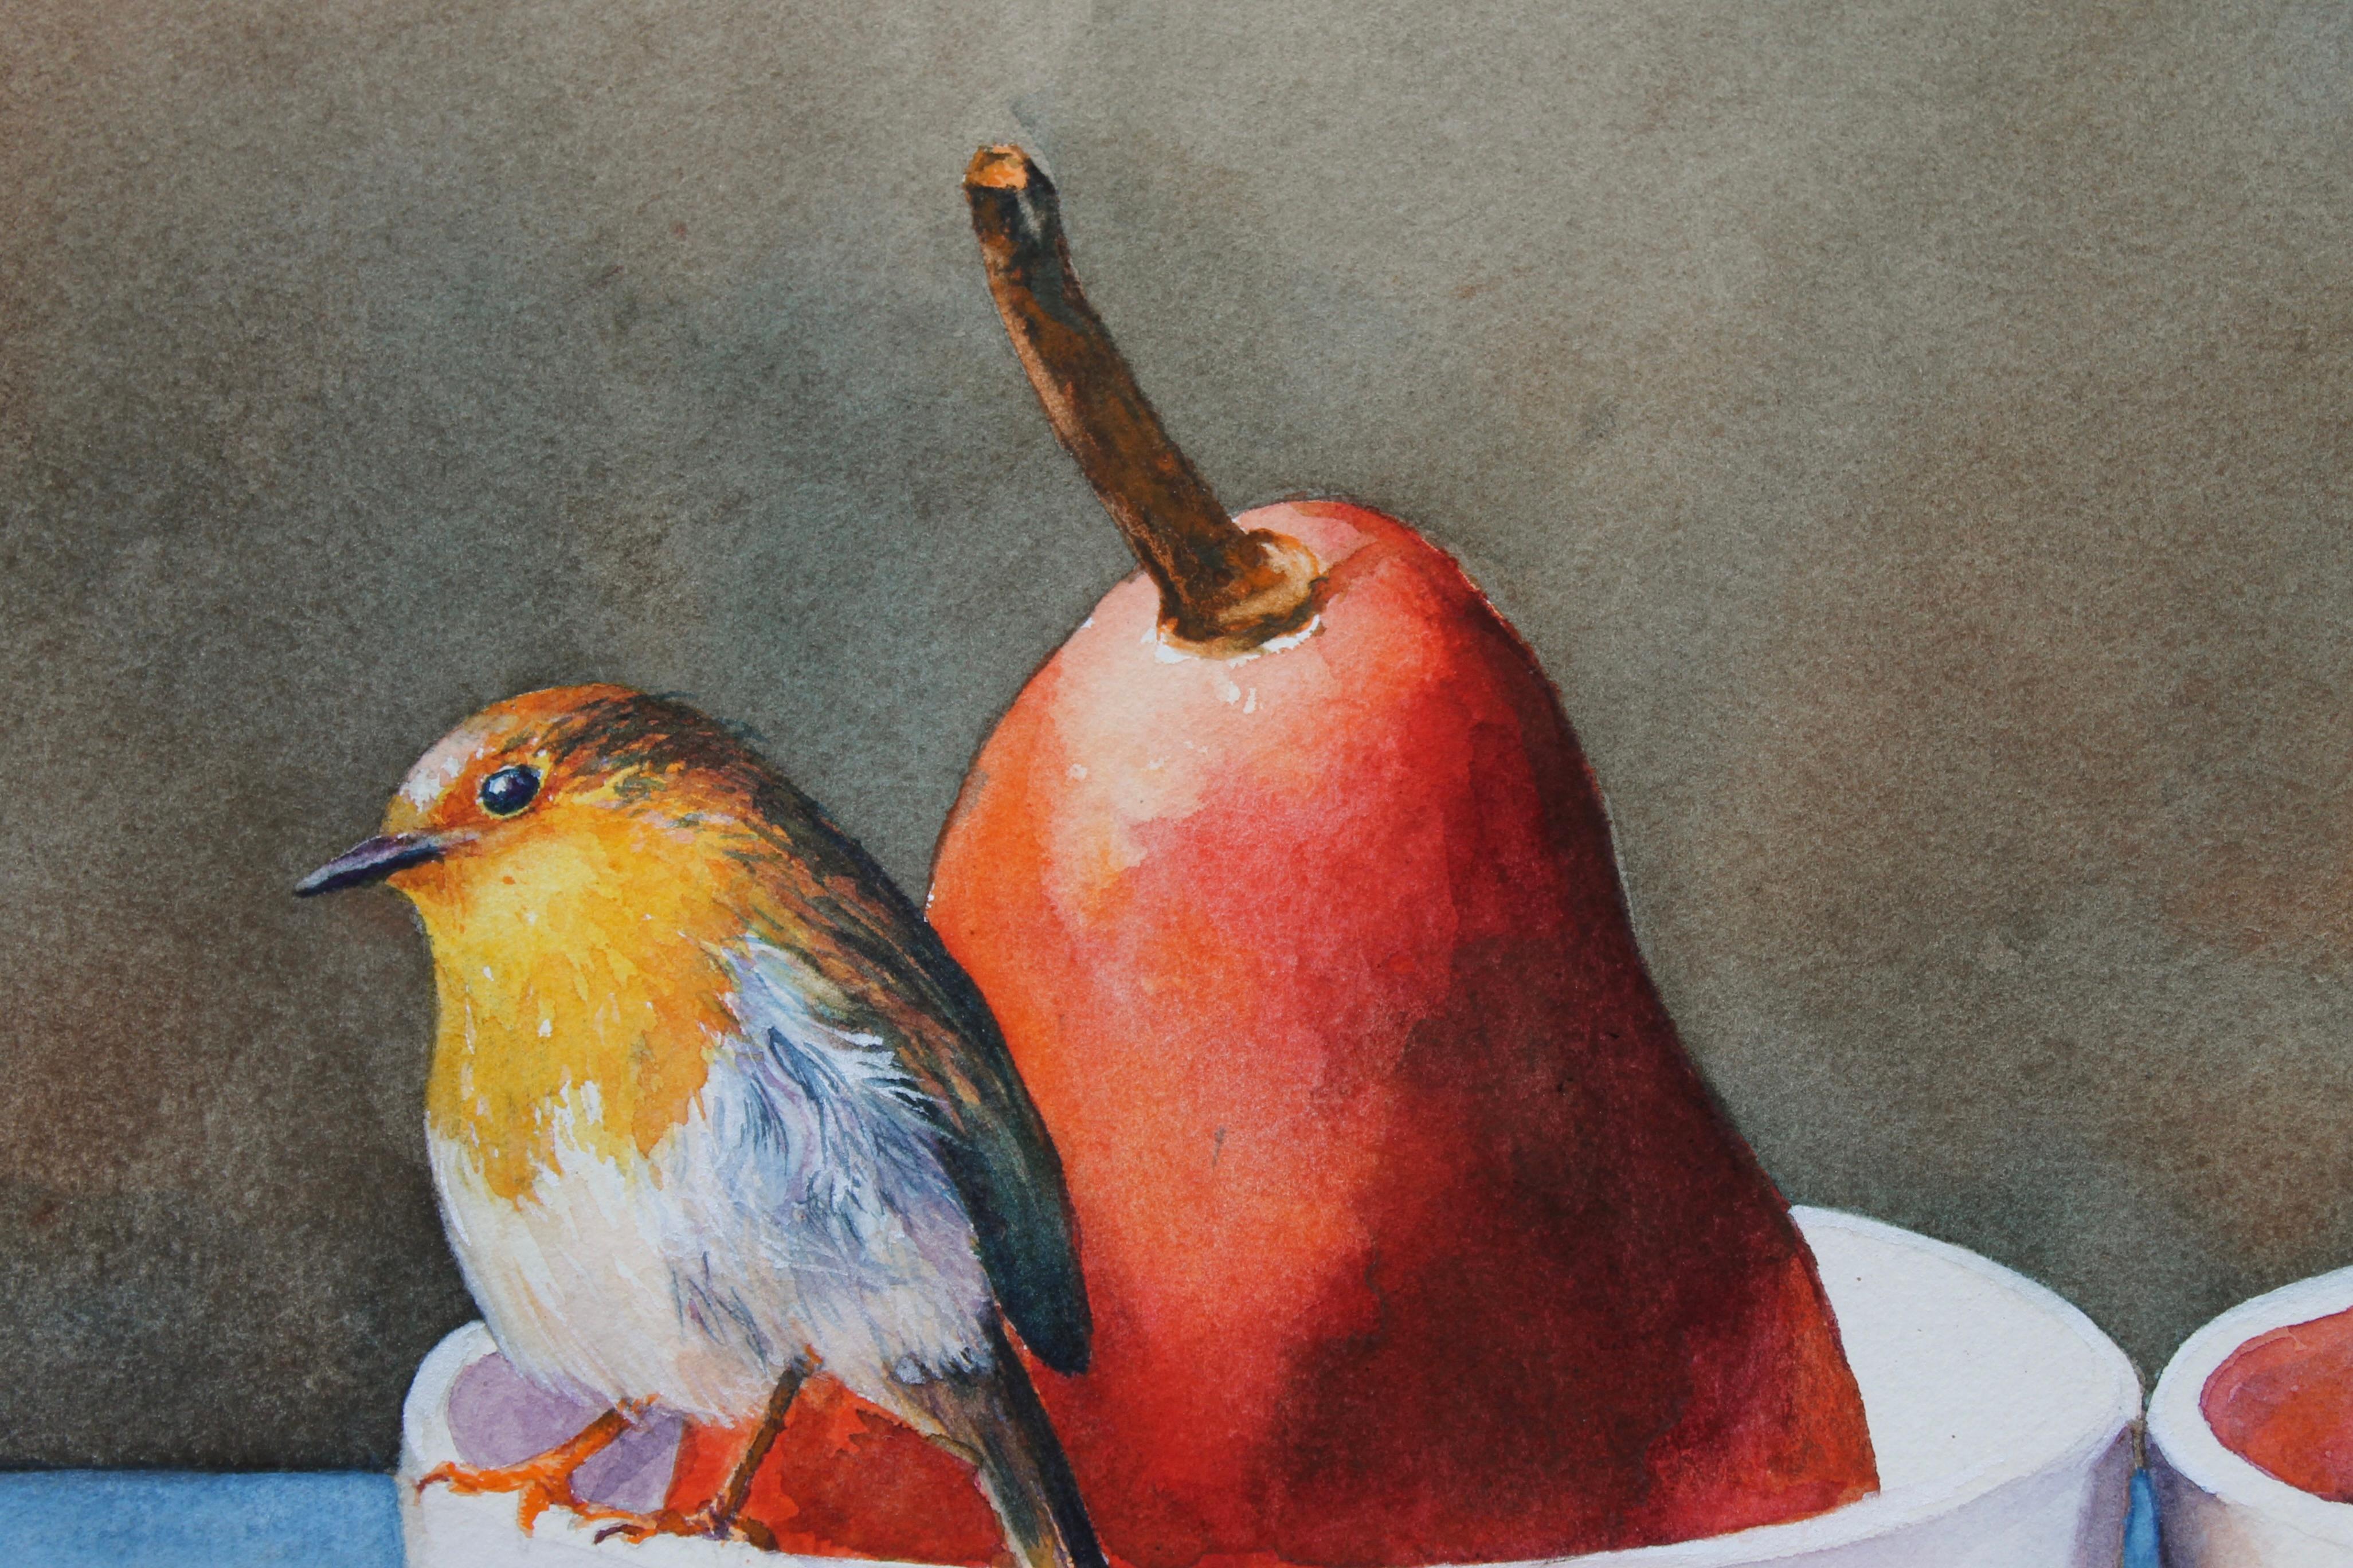 <p>Artist Comments<br>Artist Dwight Smith presents a still life of plump red pears painted in the realist tradition. The three fruits rest in white bowls with a little yellow bird taking a break on the edge of one. 